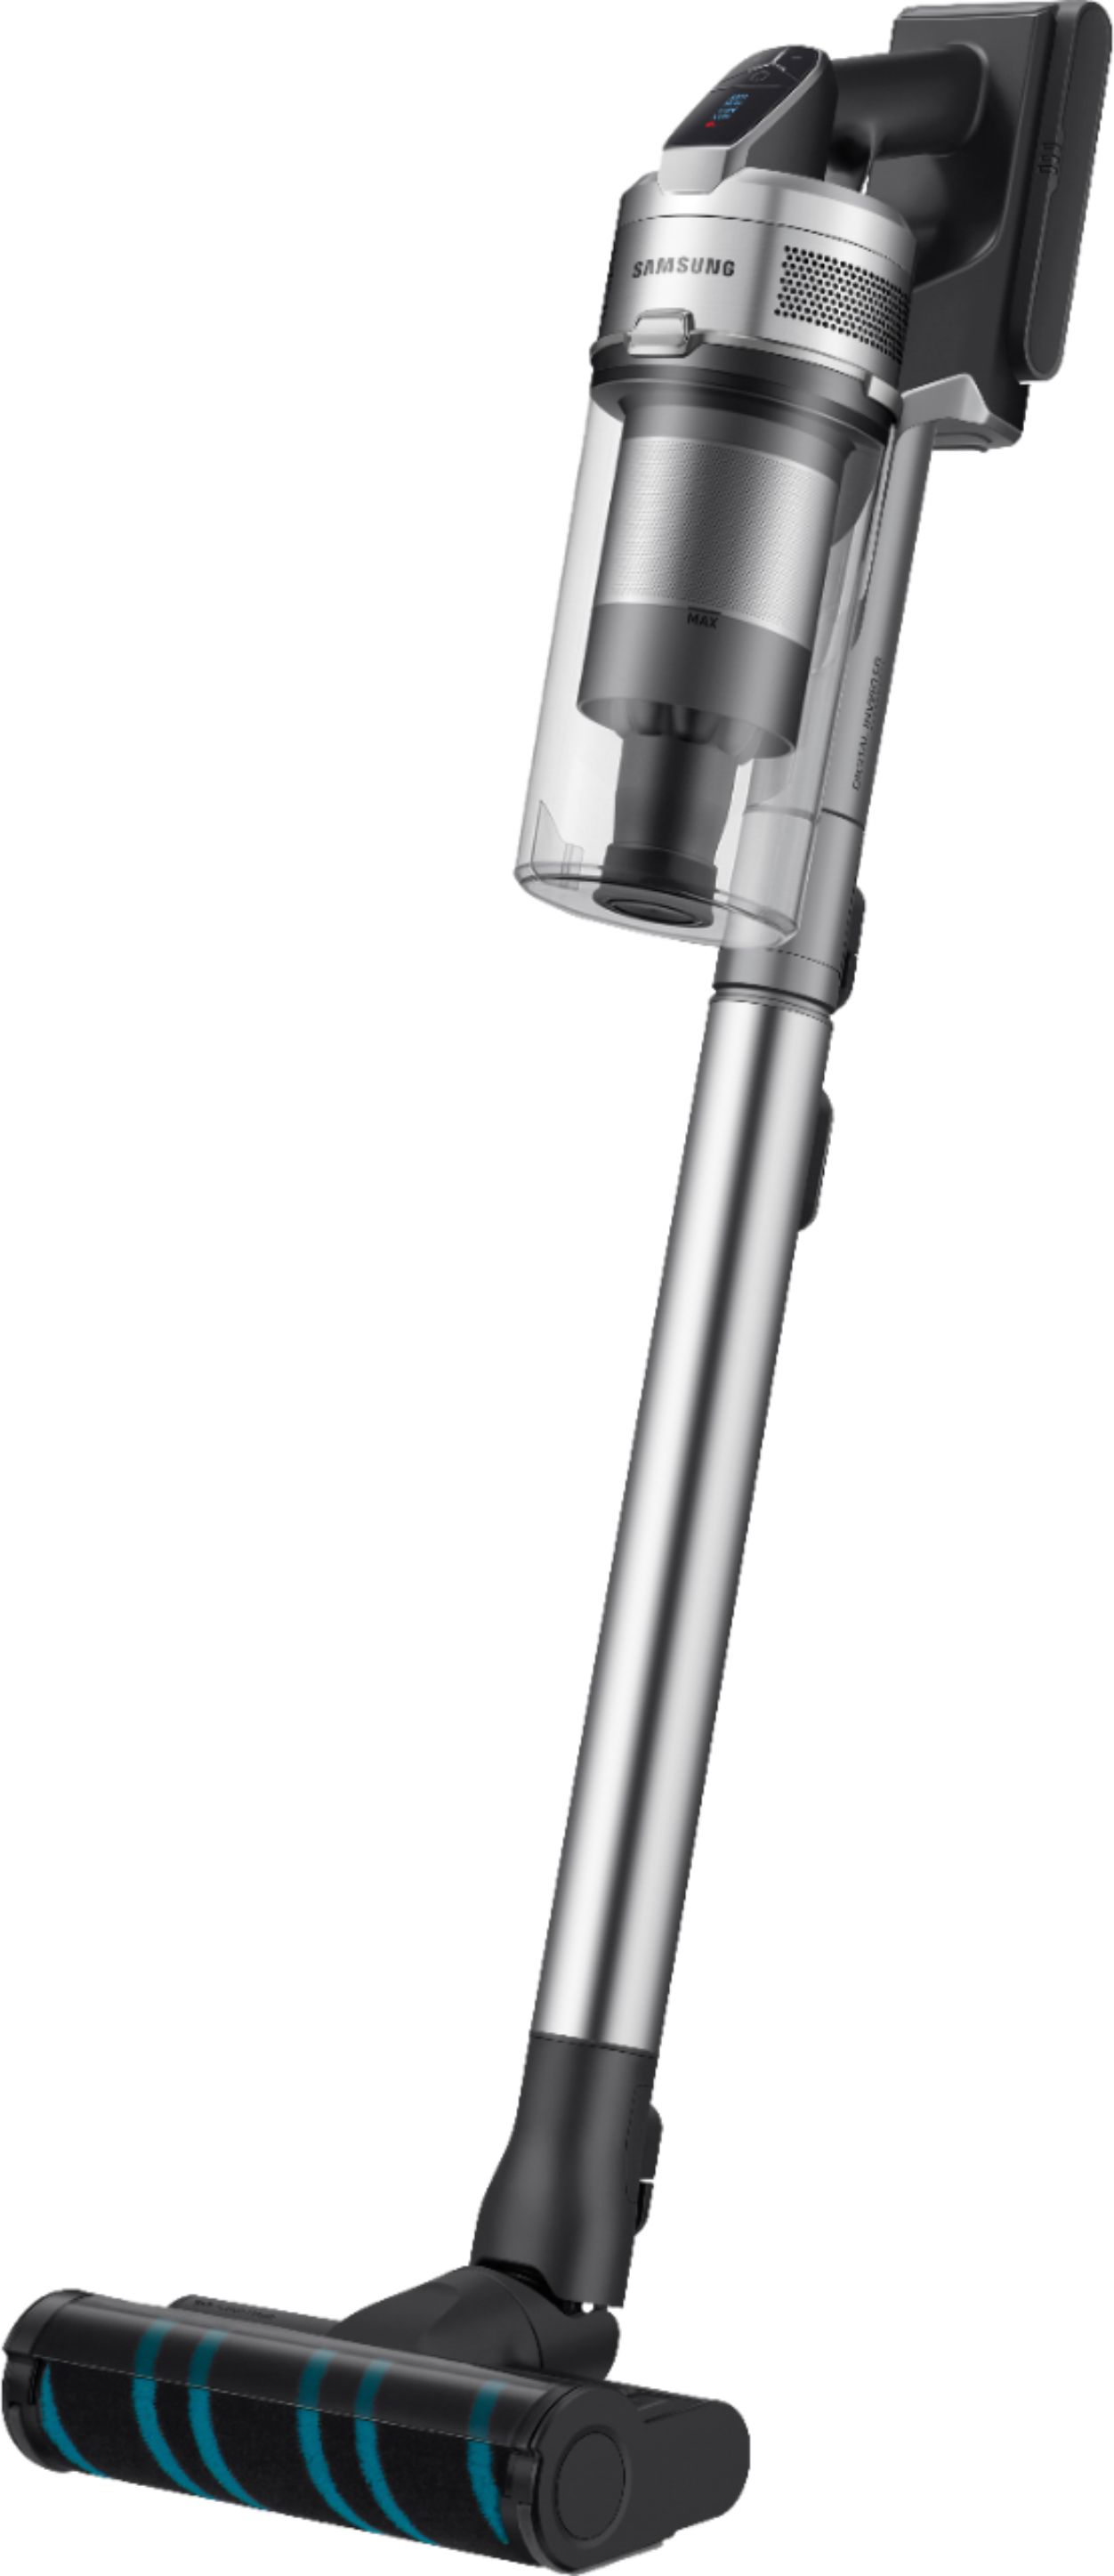 Angle View: Samsung - Jet™ 90 Complete Cordless Stick Vacuum with Dual Charging Station - ChroMetal with Silver Filter